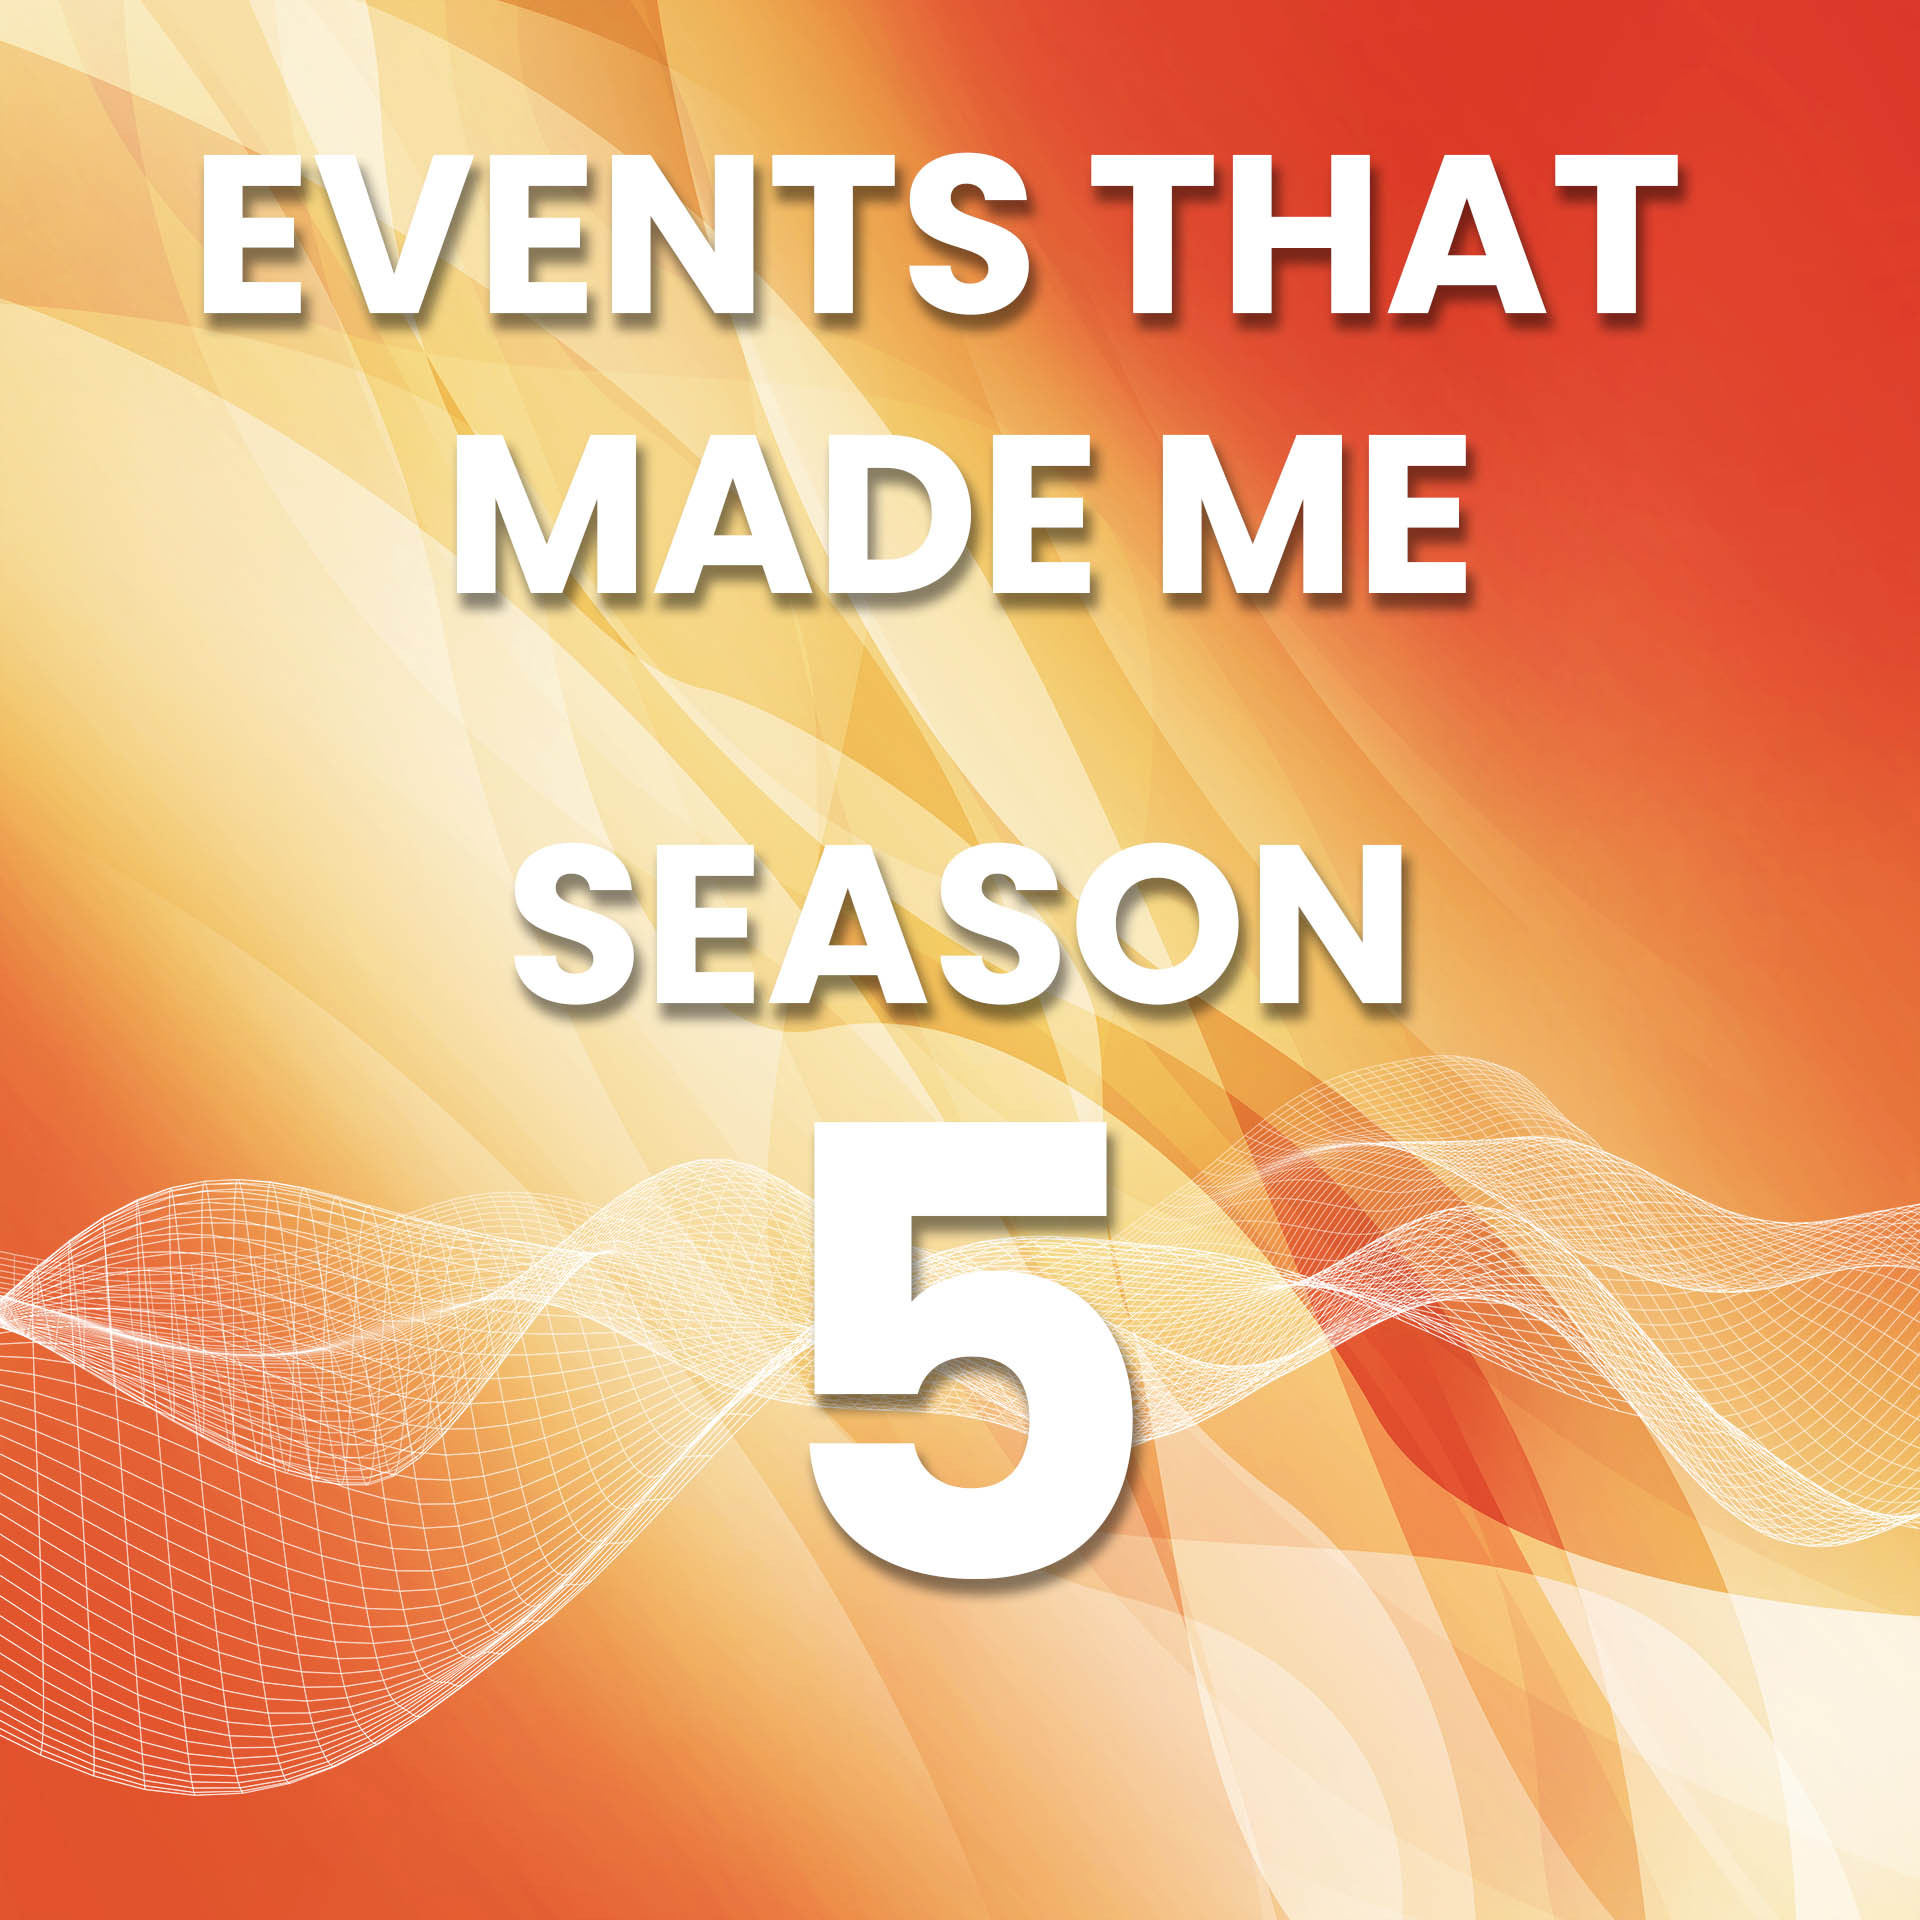 Events that Made Me Season 5